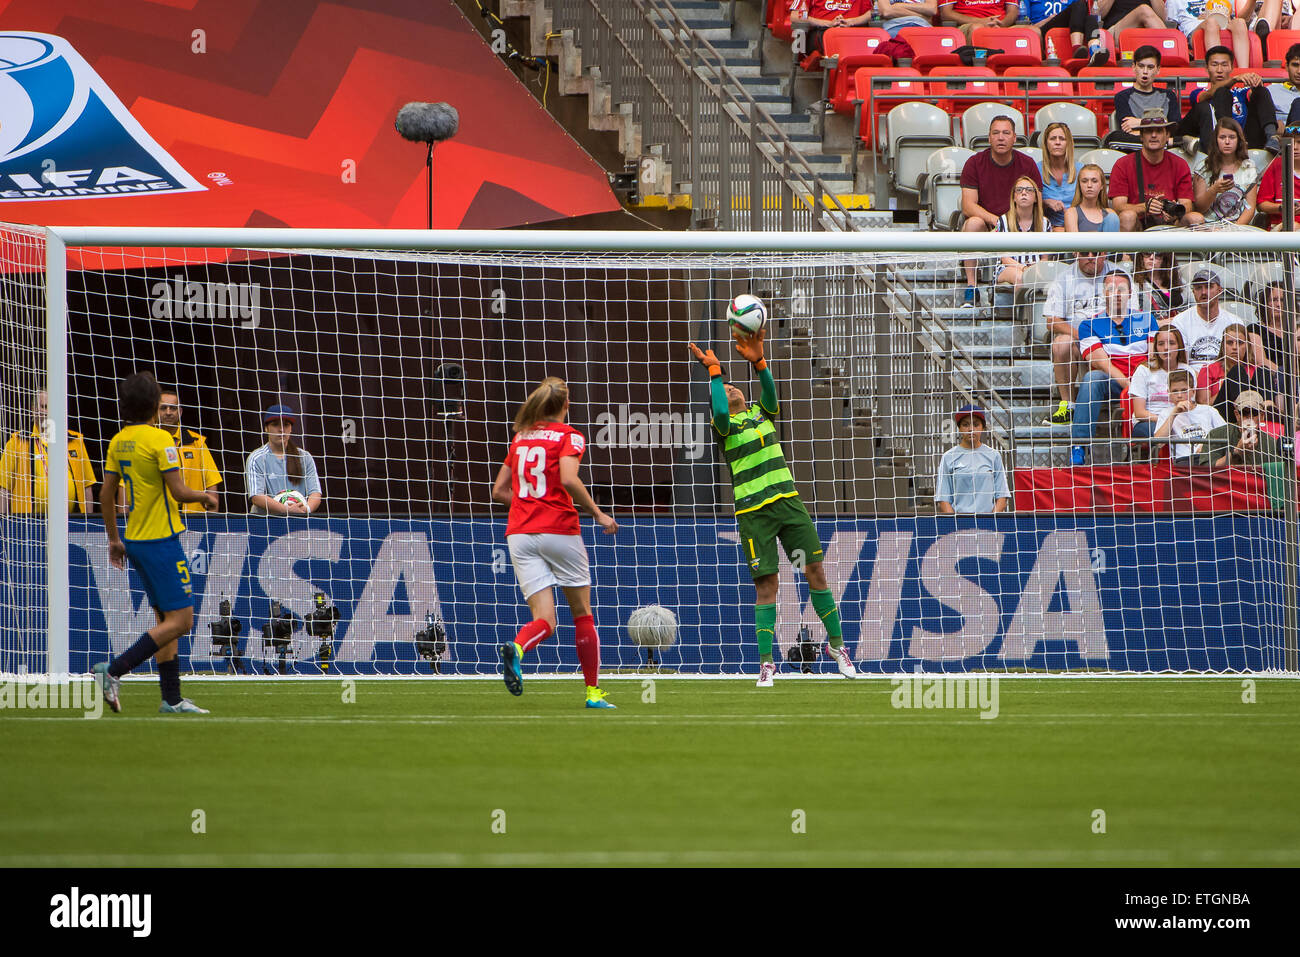 Vancouver, Canada - June 12, 2015: Ecuador goalkeeper Shirley BERRUZ (#1) blocks a Switzerland shot, only to have it fall into the net shortly afterward, during the opening round match between Switzerland and Ecuador of the FIFA Women's World Cup Canada 2015 at BC Place Stadium. Switzerland won the match 10-1. Stock Photo